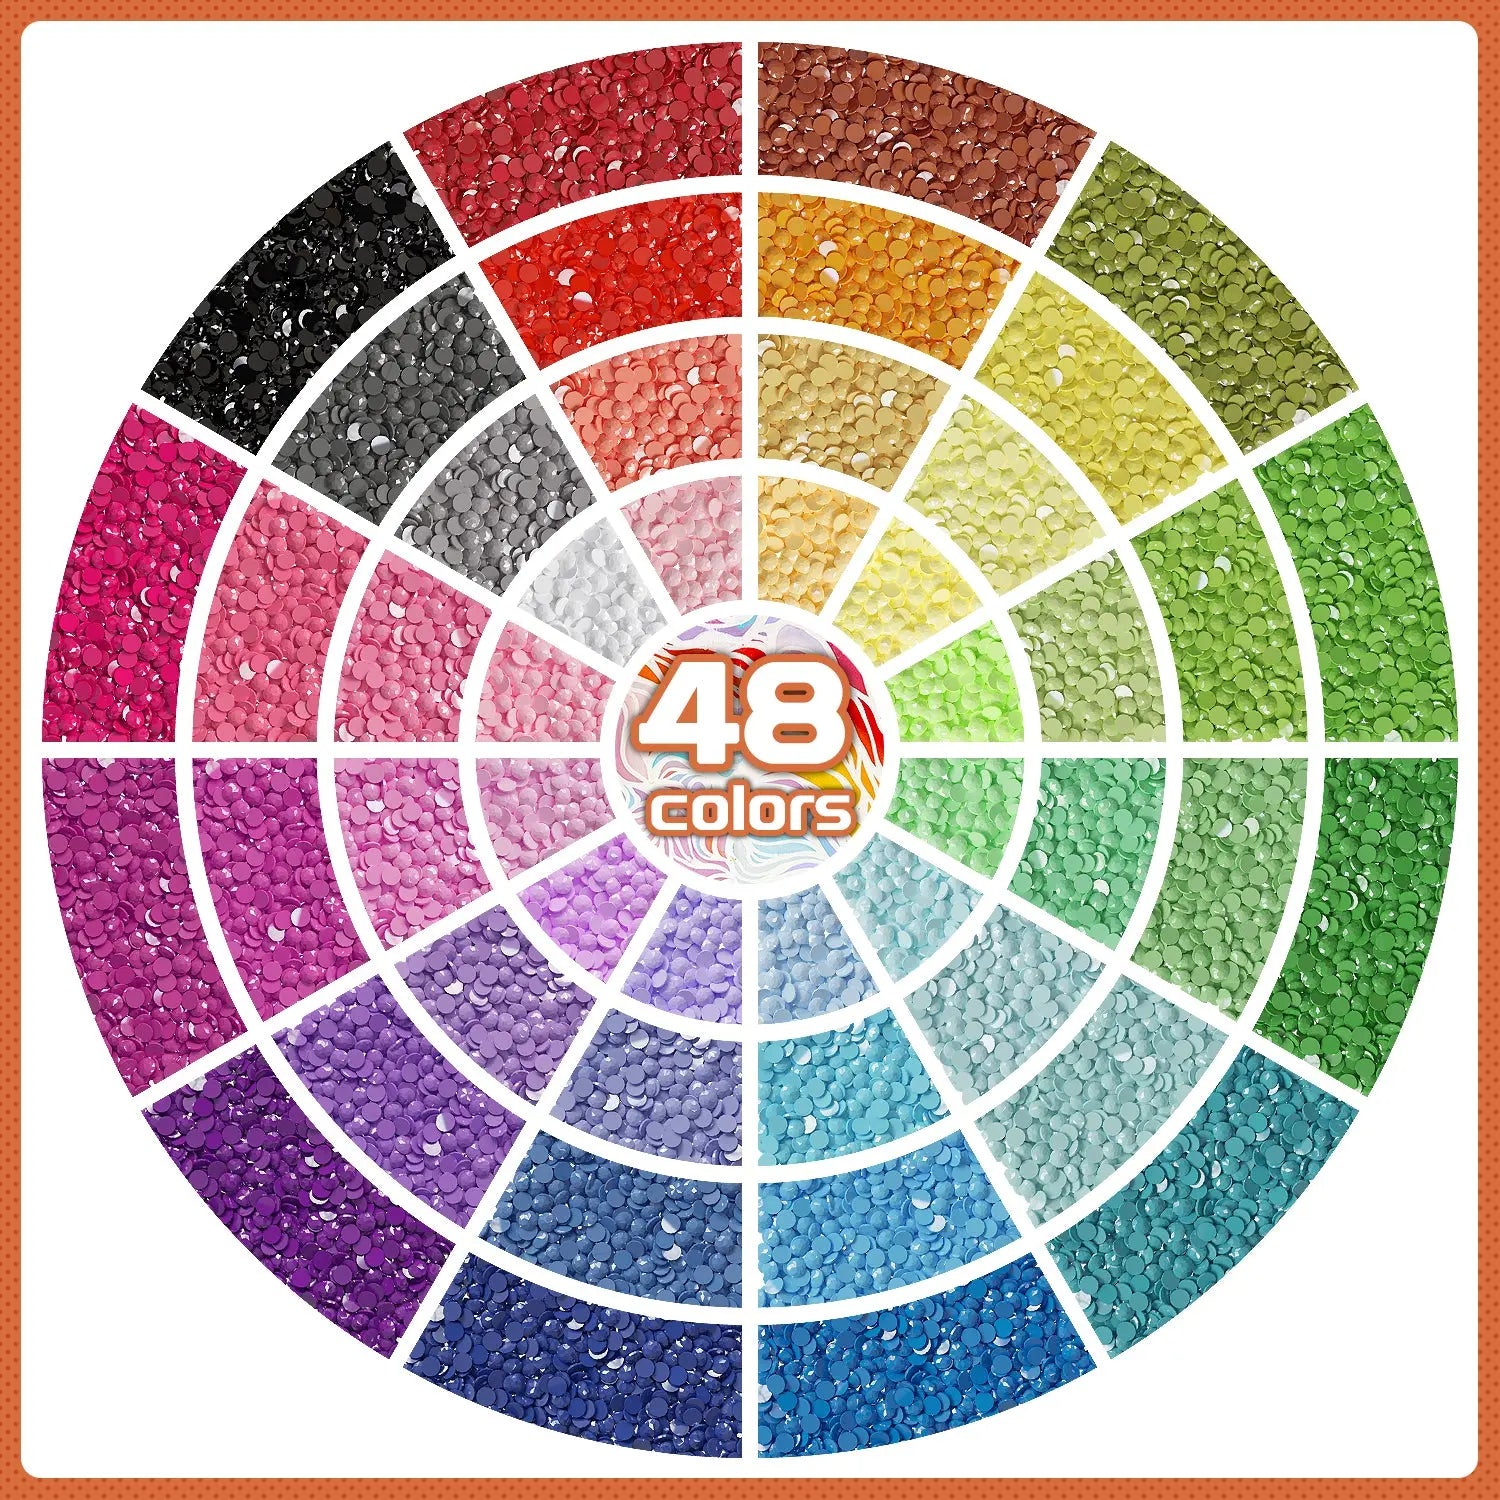 Diamond Painting Color Chart  Game Changer for Craft 